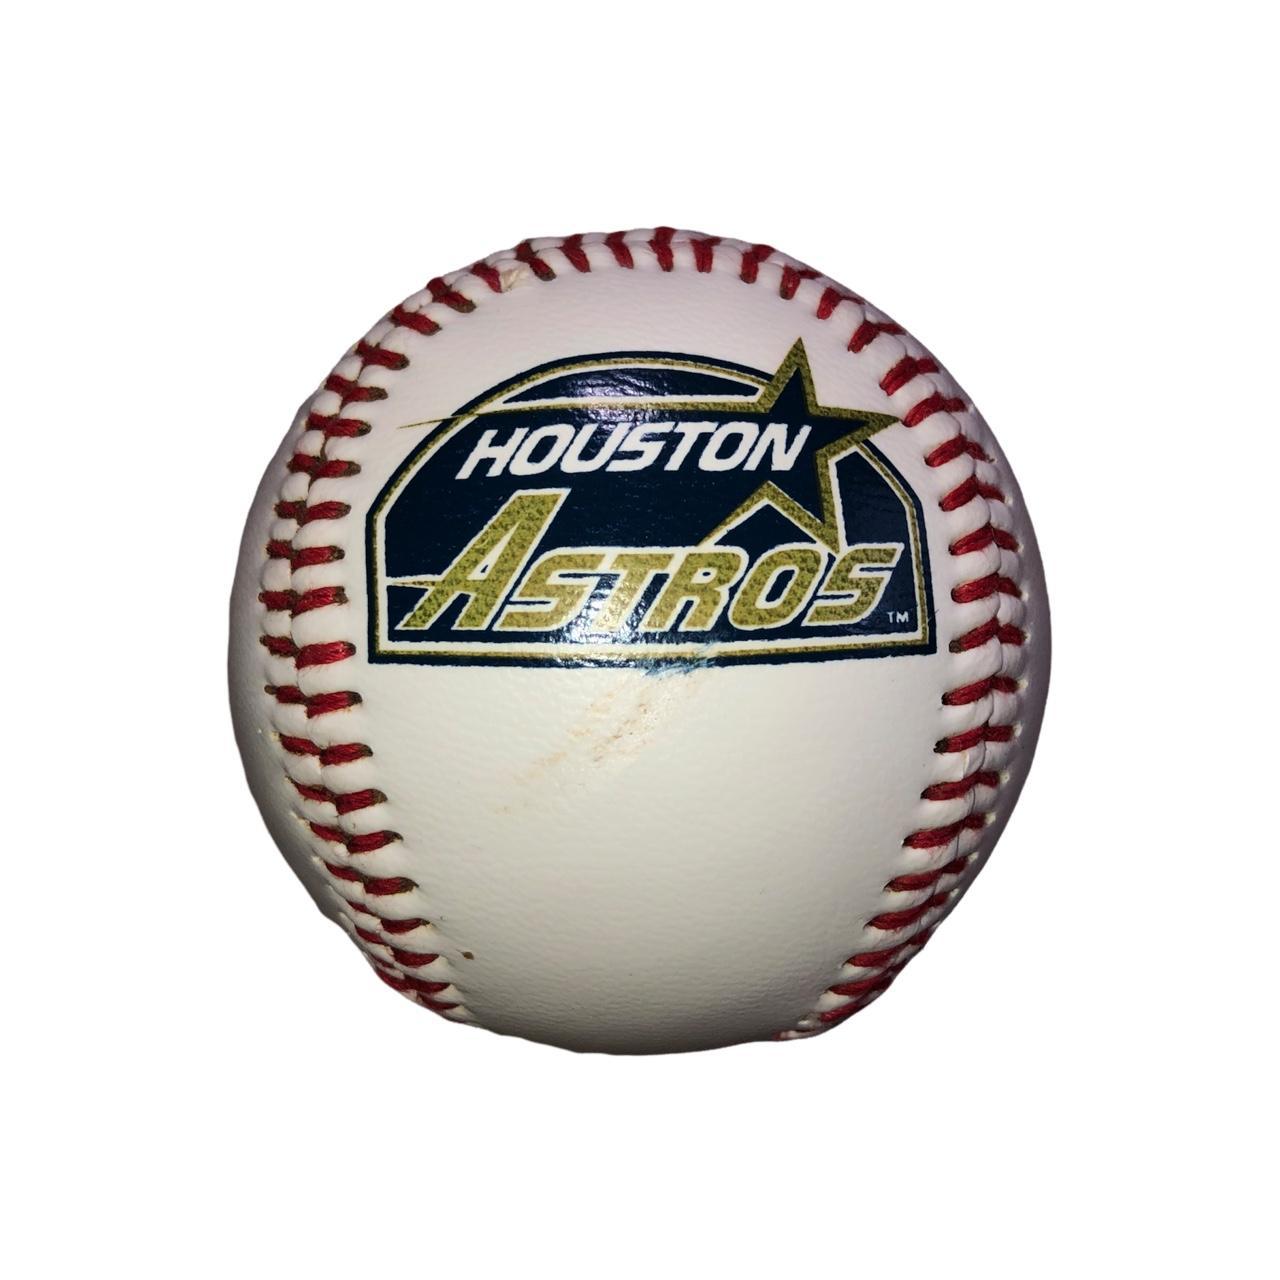 Product Image 1 - Vintage Houston Astros Laich Baseball
Dated: